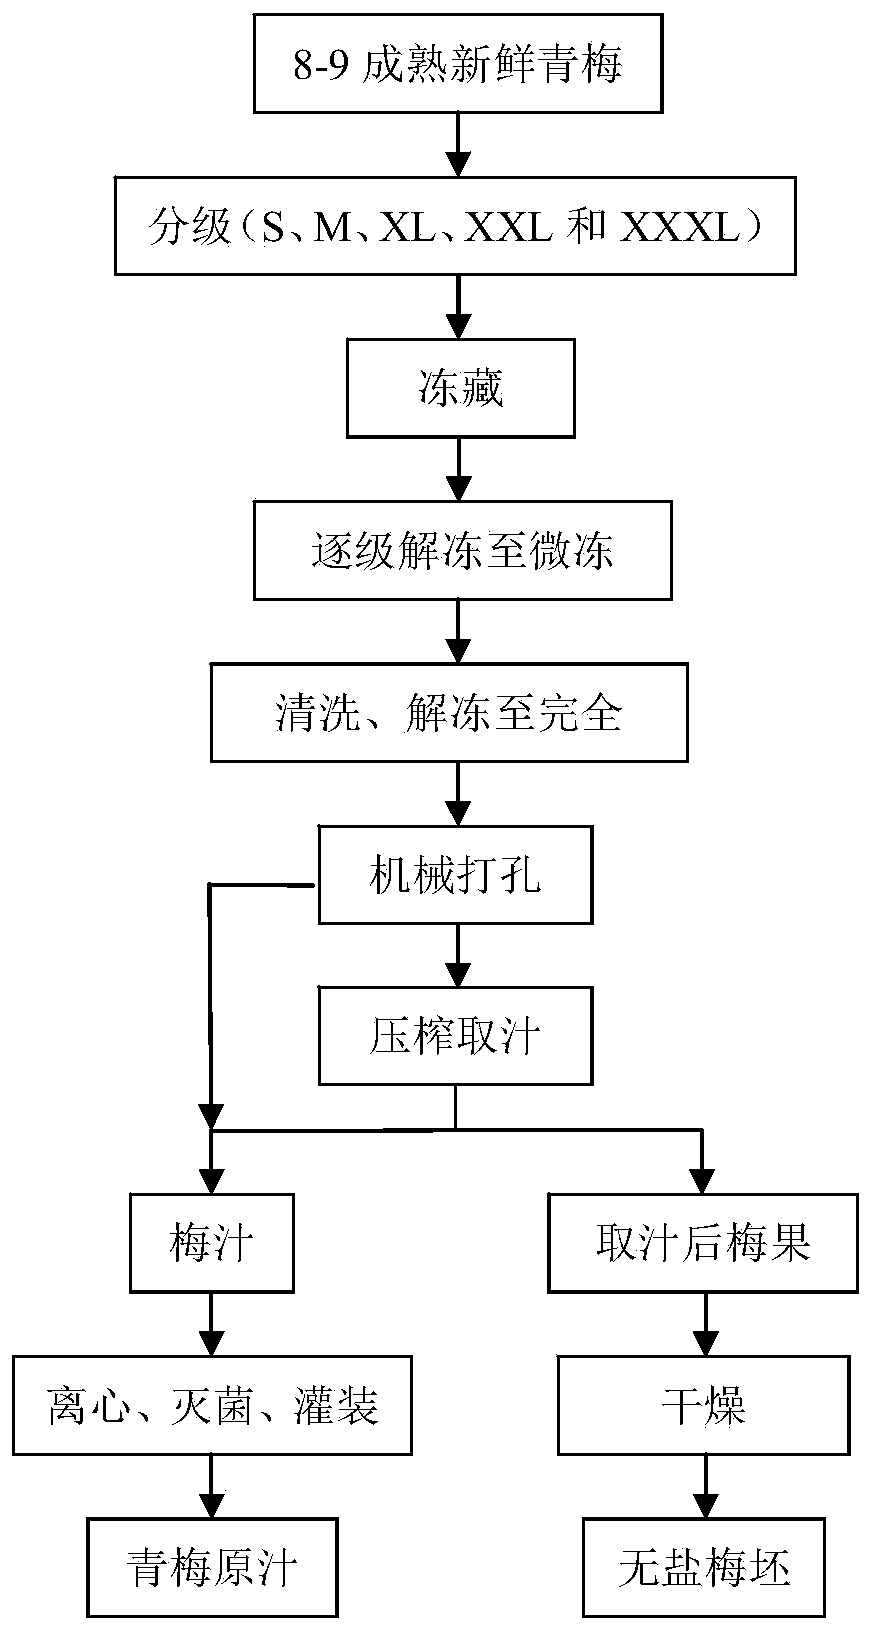 Green plum processing method for coproducing normal green plum juice and salt-free green plum blanks